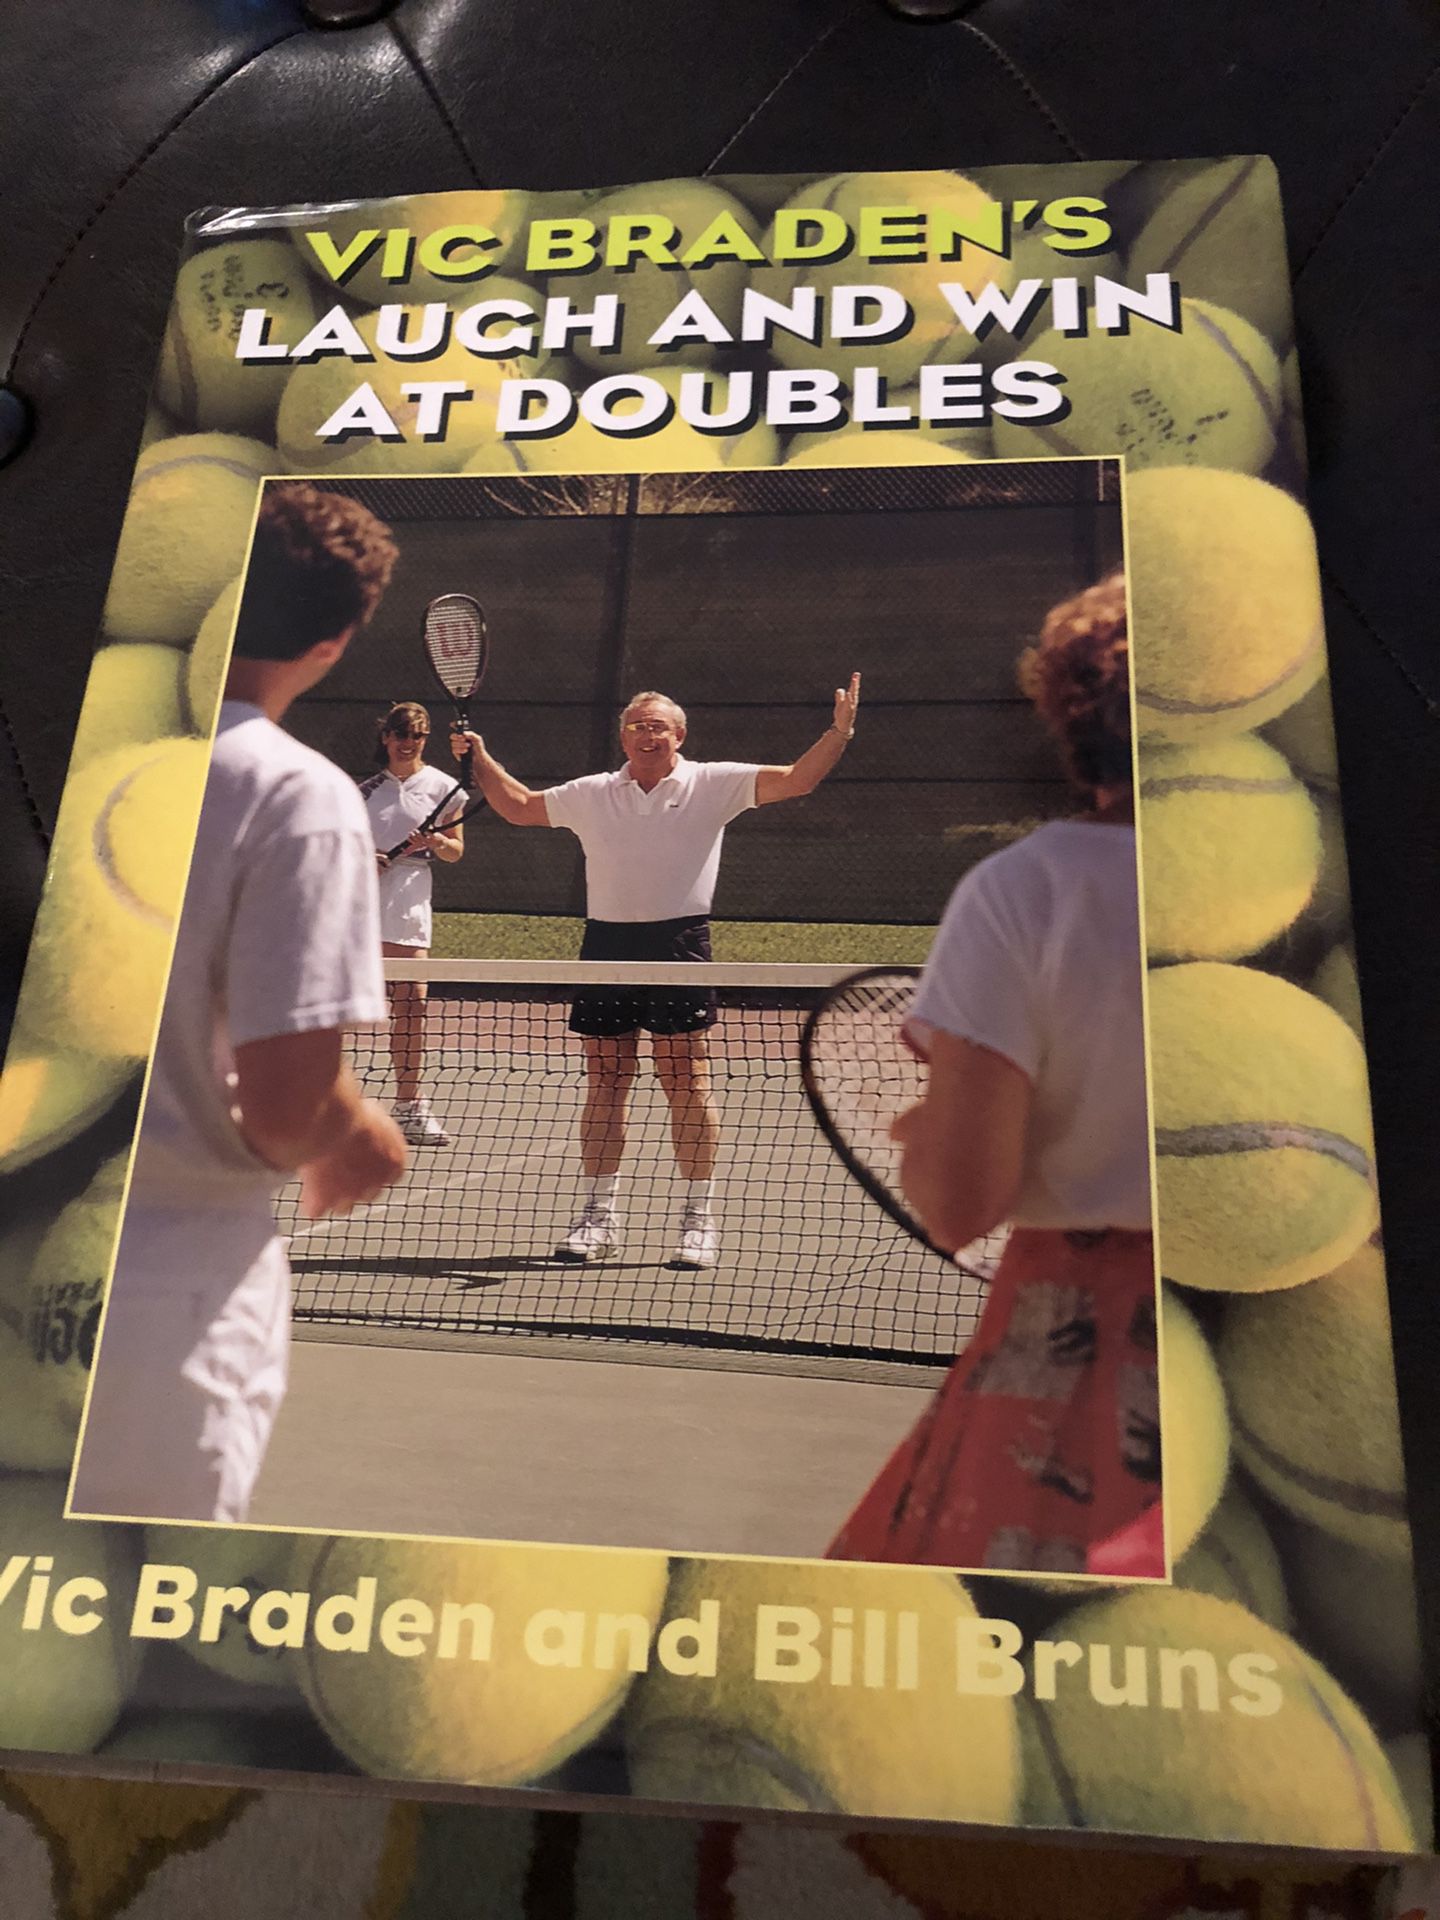 Tennis book and picture frame $10 for both. Book is Vic Braden’s LAUGH AND WIN AT DOUBLES